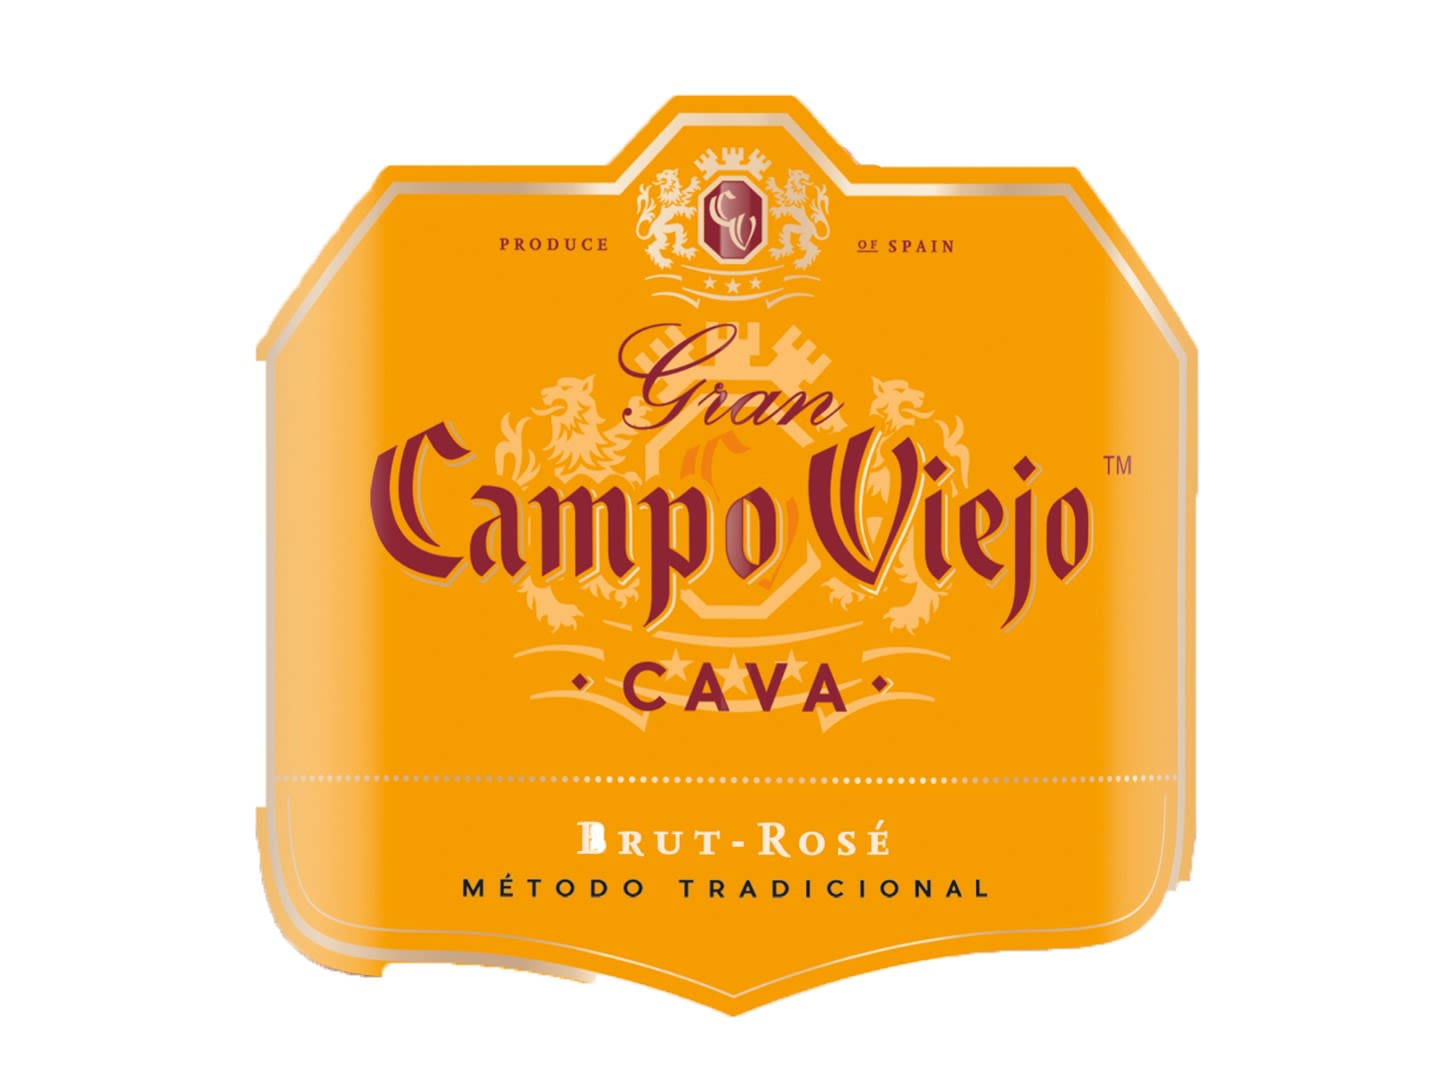 Campo Viejo Wine - Learn About & Buy Online | Wine.com